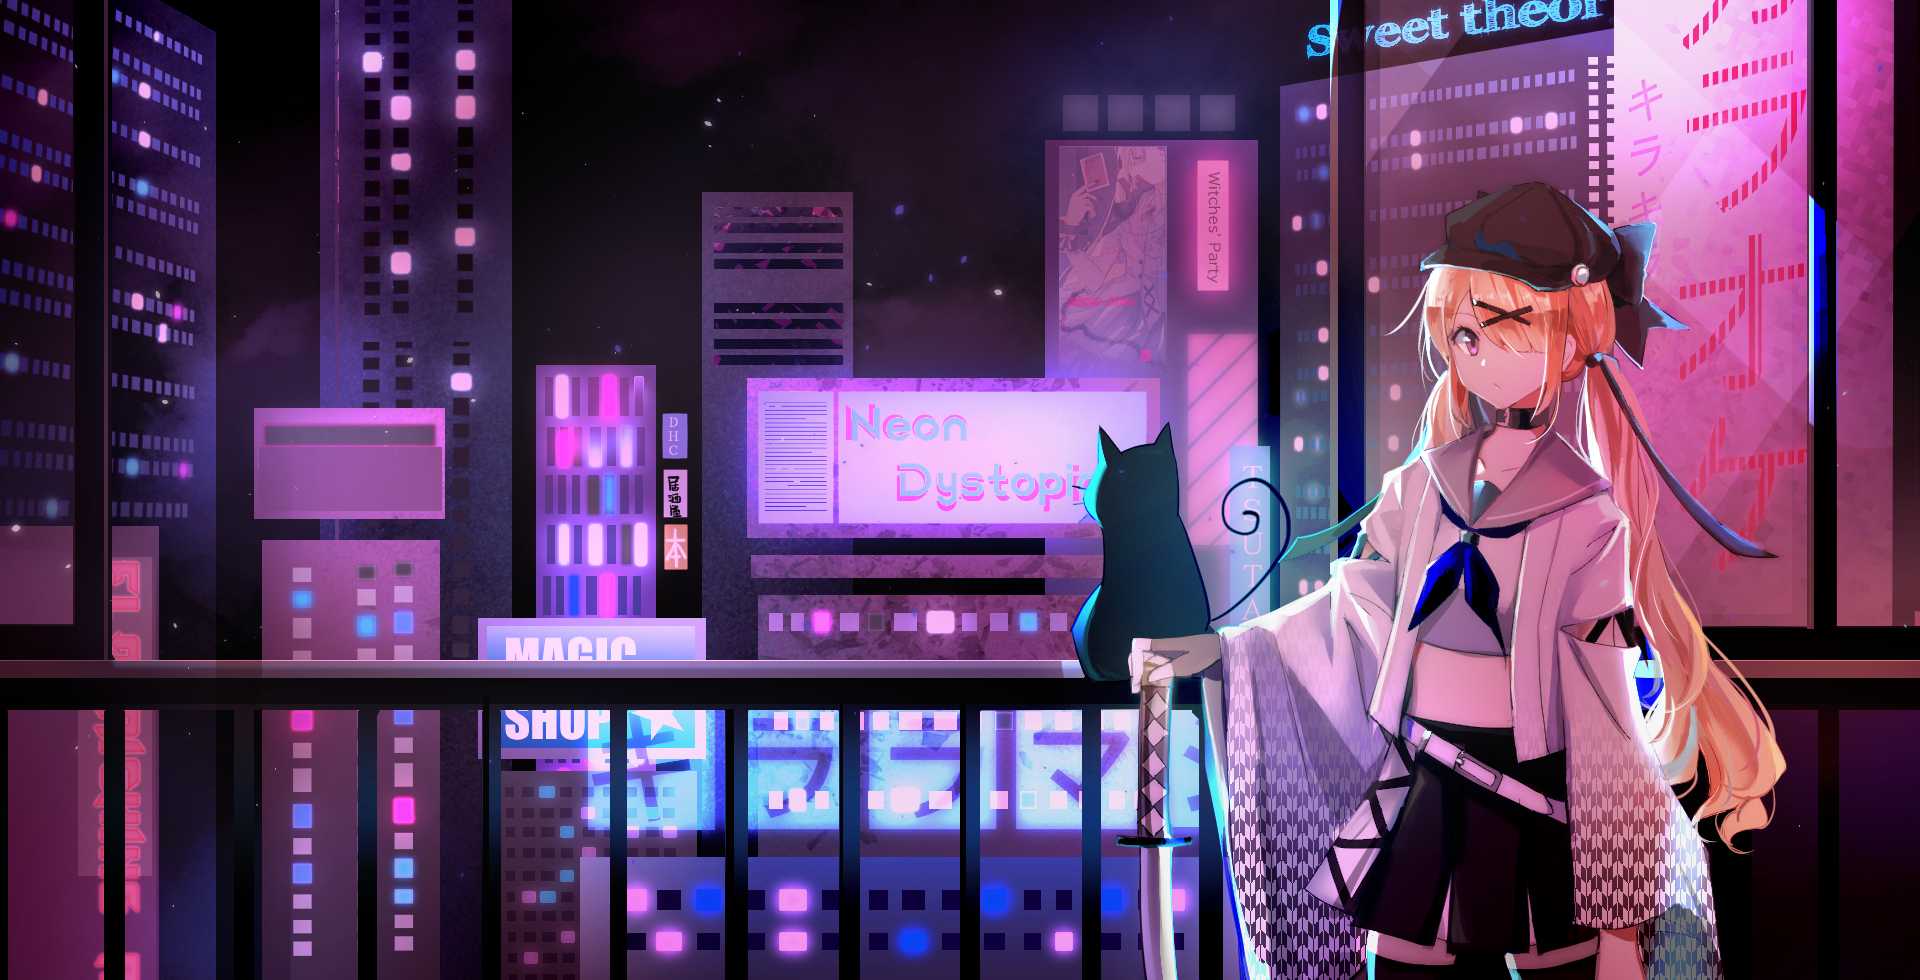 Anime Anime Girls Blonde Cats Black Cats Fence Night City Neon Japanese Clothes Katana Twintails Vio 1920x980